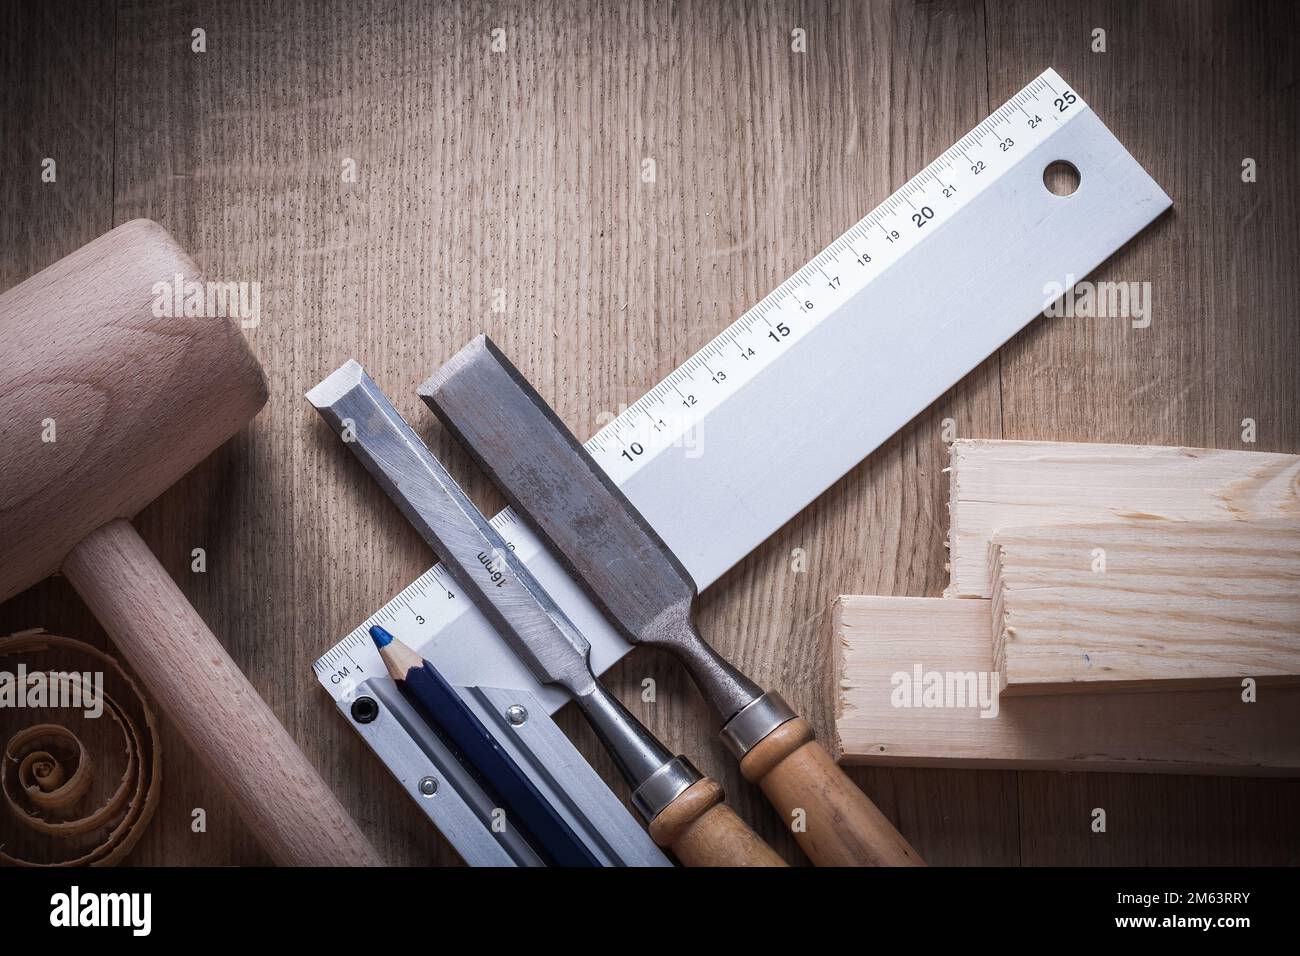 Wooden bricks hammer curled up planning chips firmer chisels square ruler pencil on wood board construction concept. Stock Photo